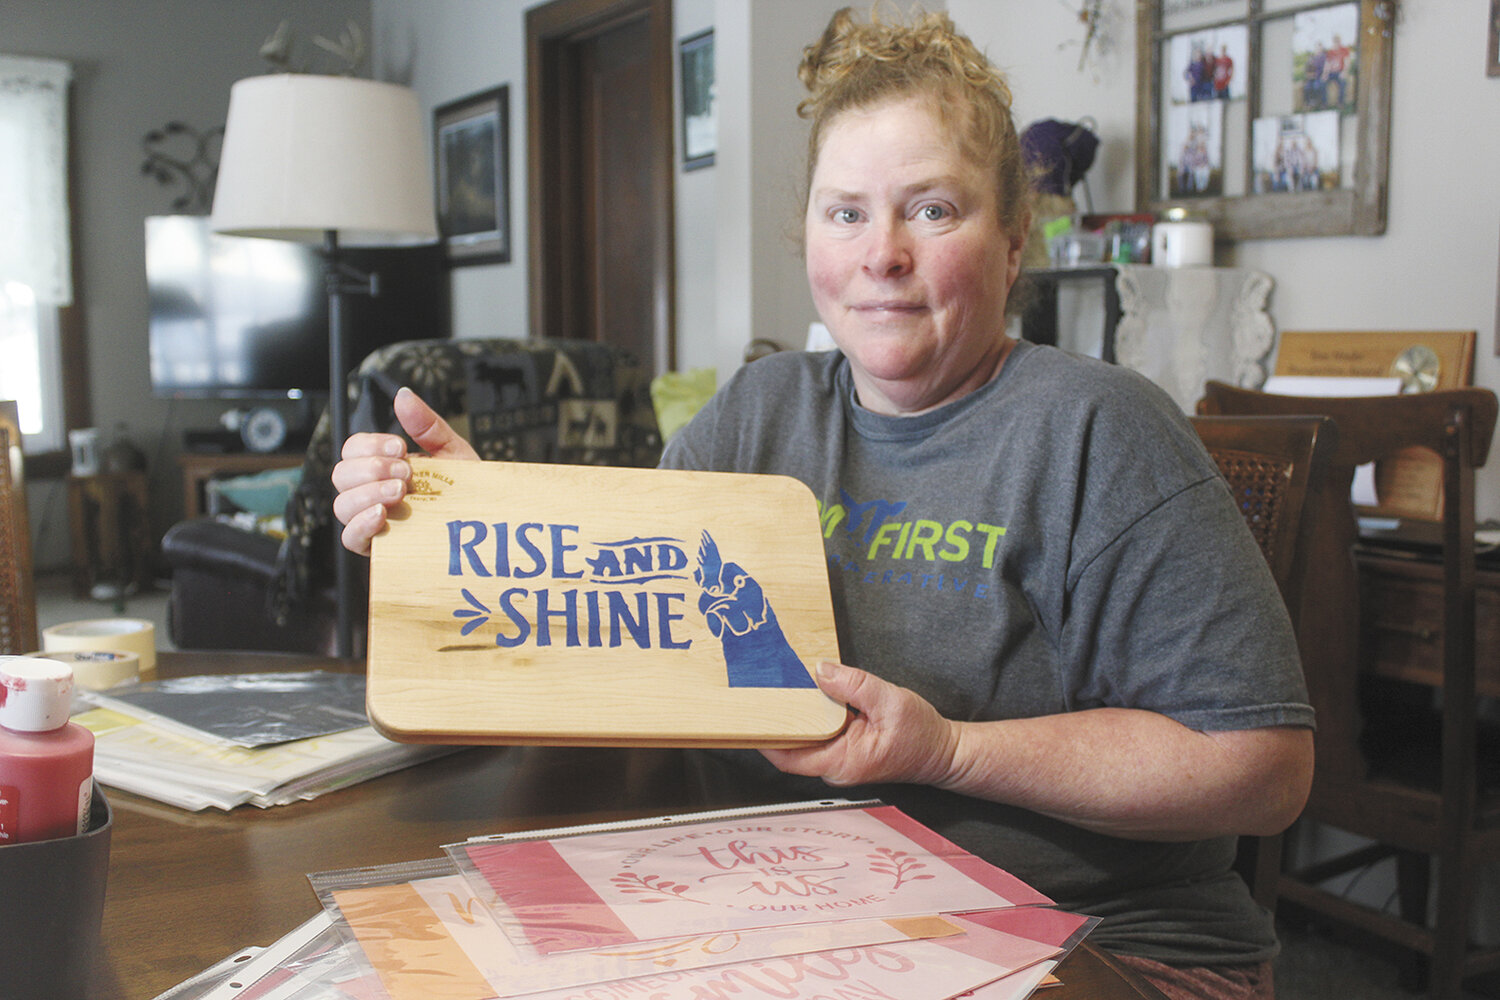 Melissa Boehlke displays an example of a stencil art craft Jan. 22, like the ones that will be featured at the Dairy Moms social she is hosting, in Thorp, Wisconsin. Boehlke is hosting the Feb. 15 event as a way to help central Wisconsin dairy women connect with other like-minded people.